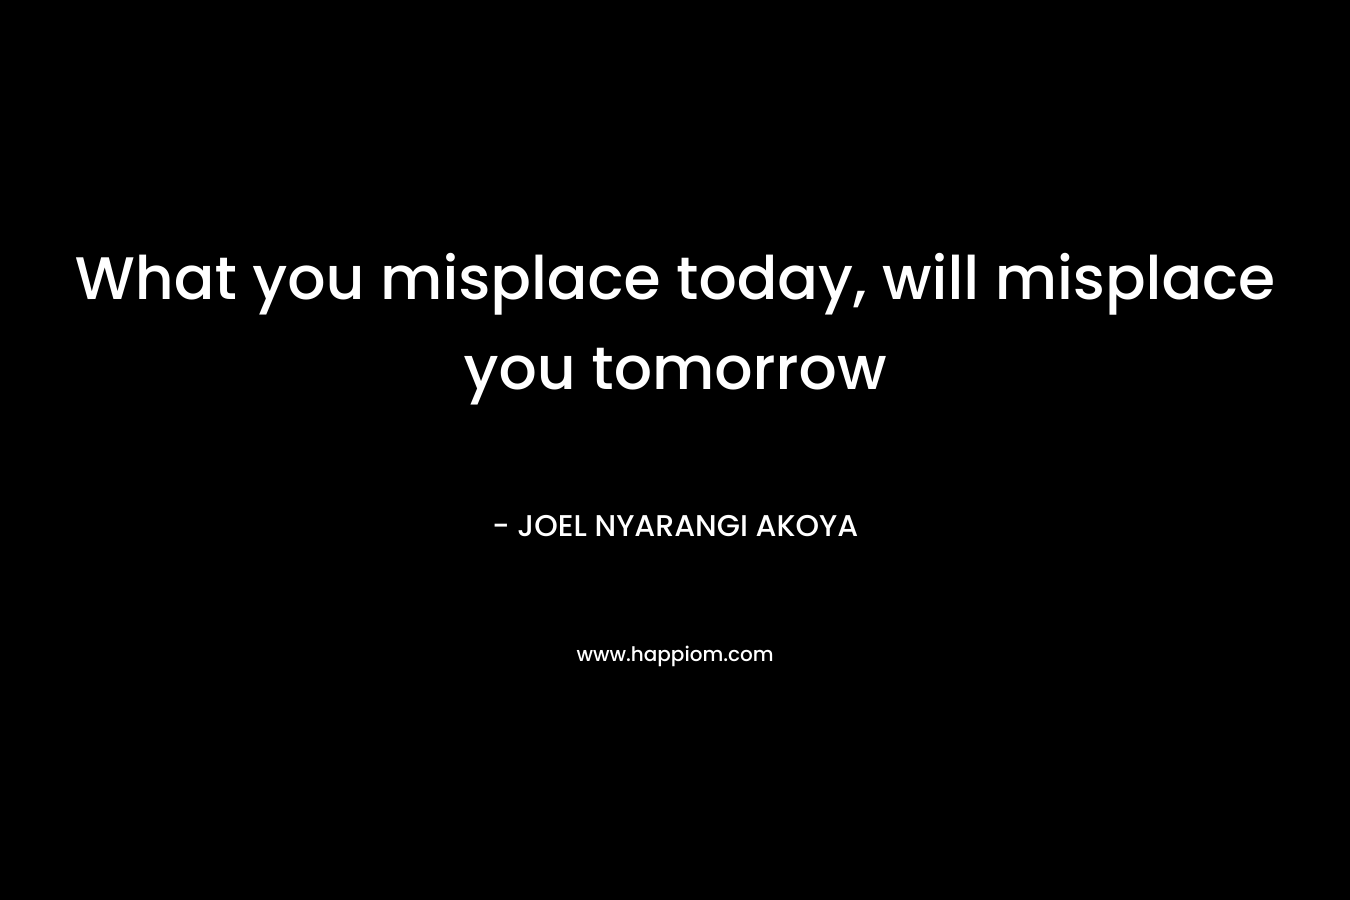 What you misplace today, will misplace you tomorrow